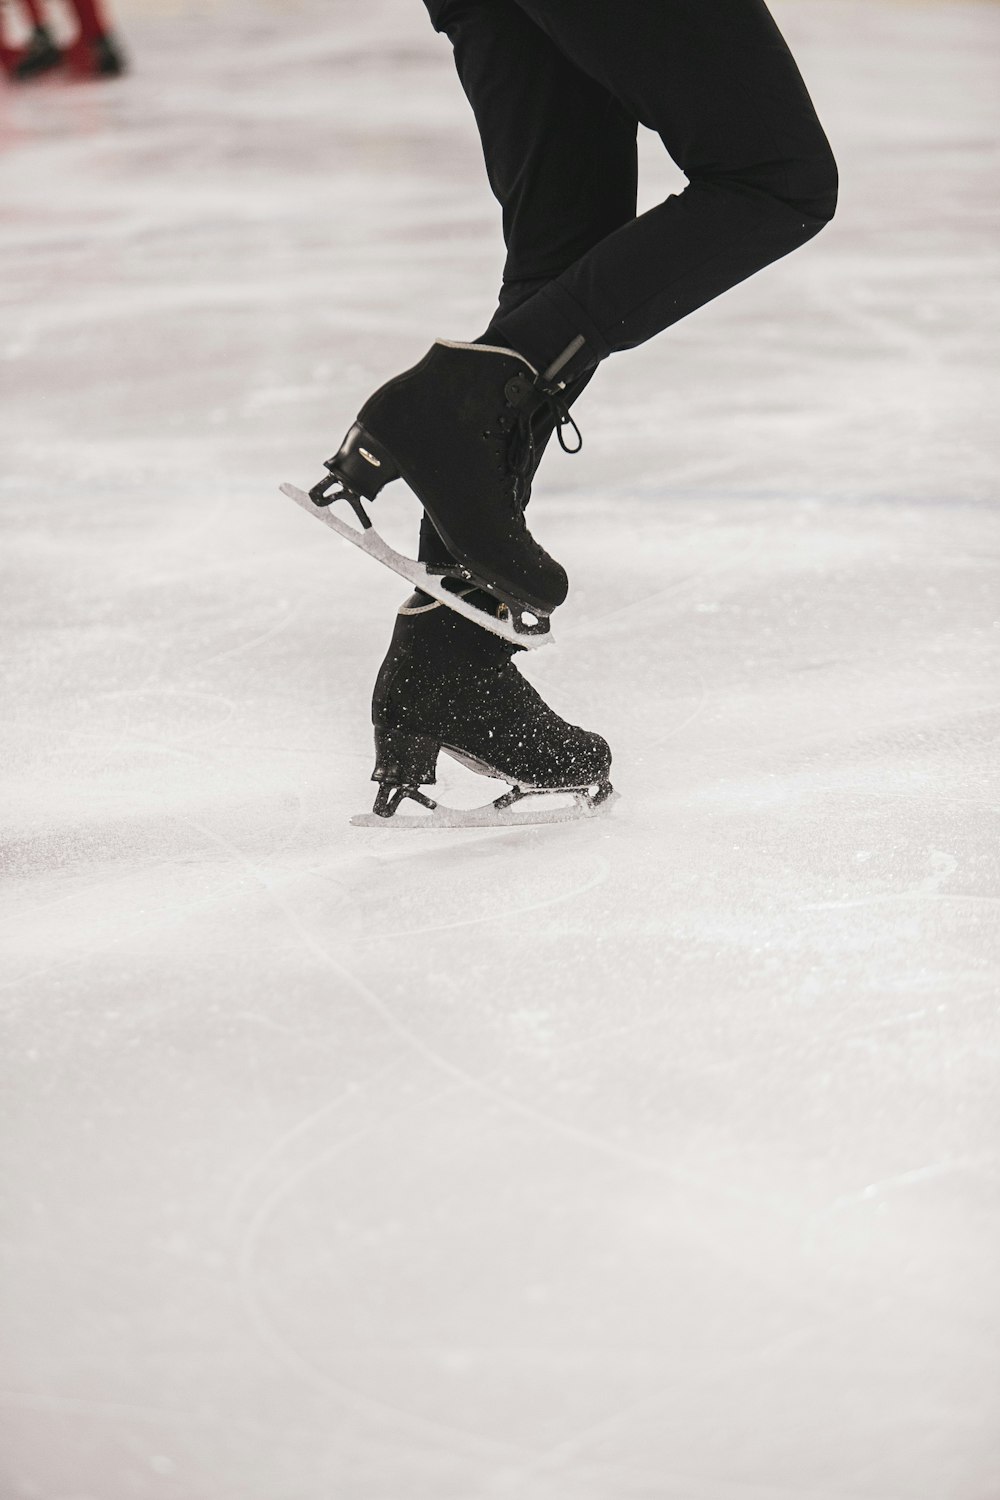 person in black jacket and black pants playing ice hockey